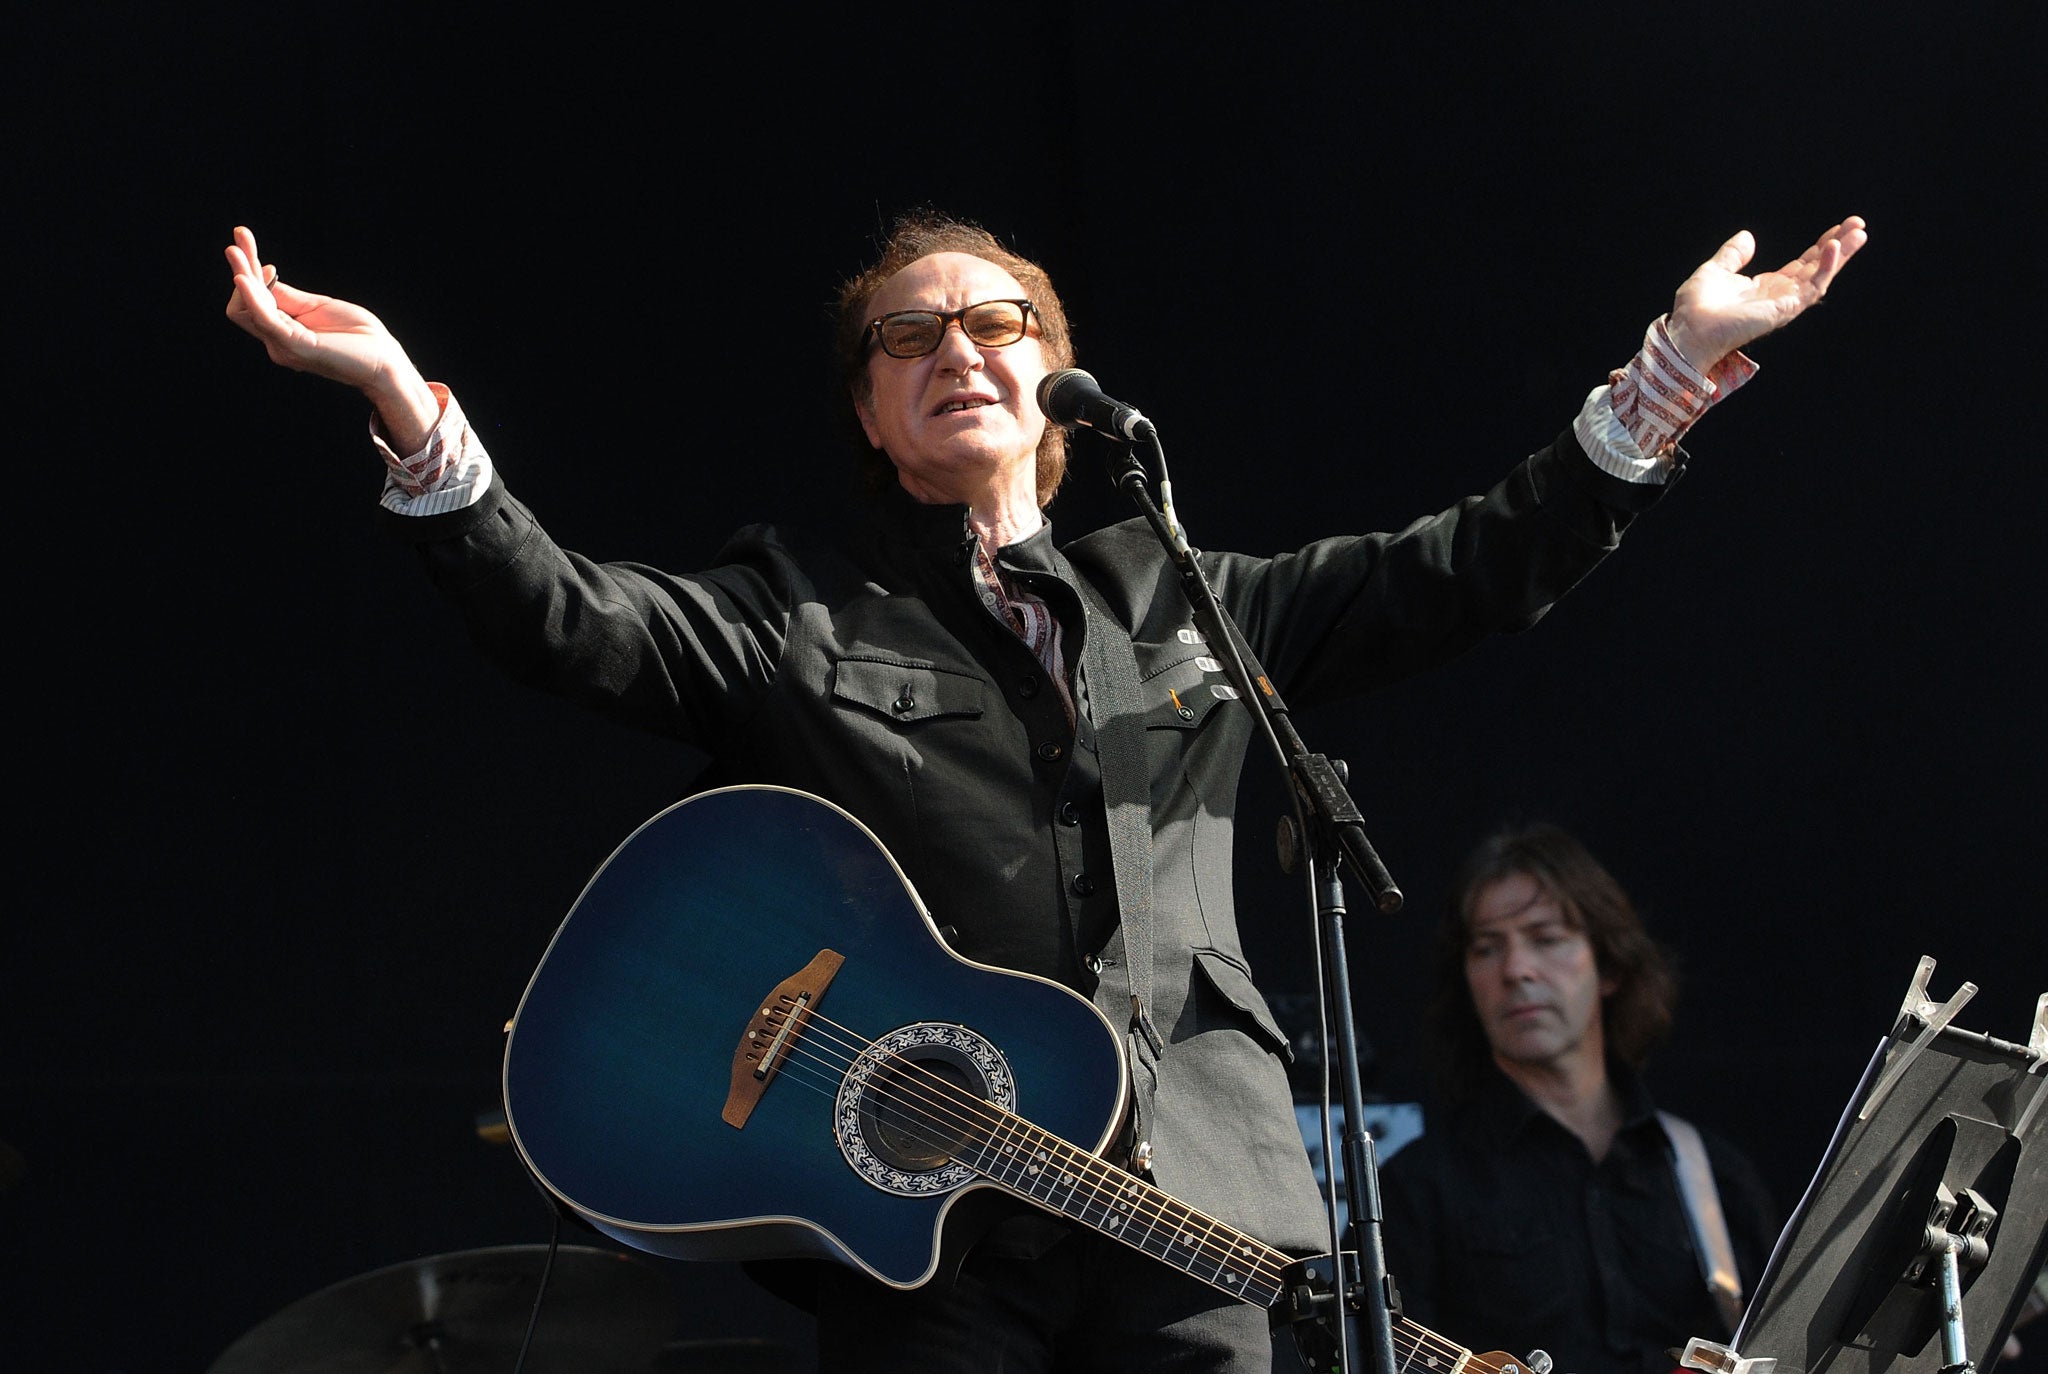 Ray Davies performing on stage during the Hard Rock Calling music festival in London's Hyde Park, 2011